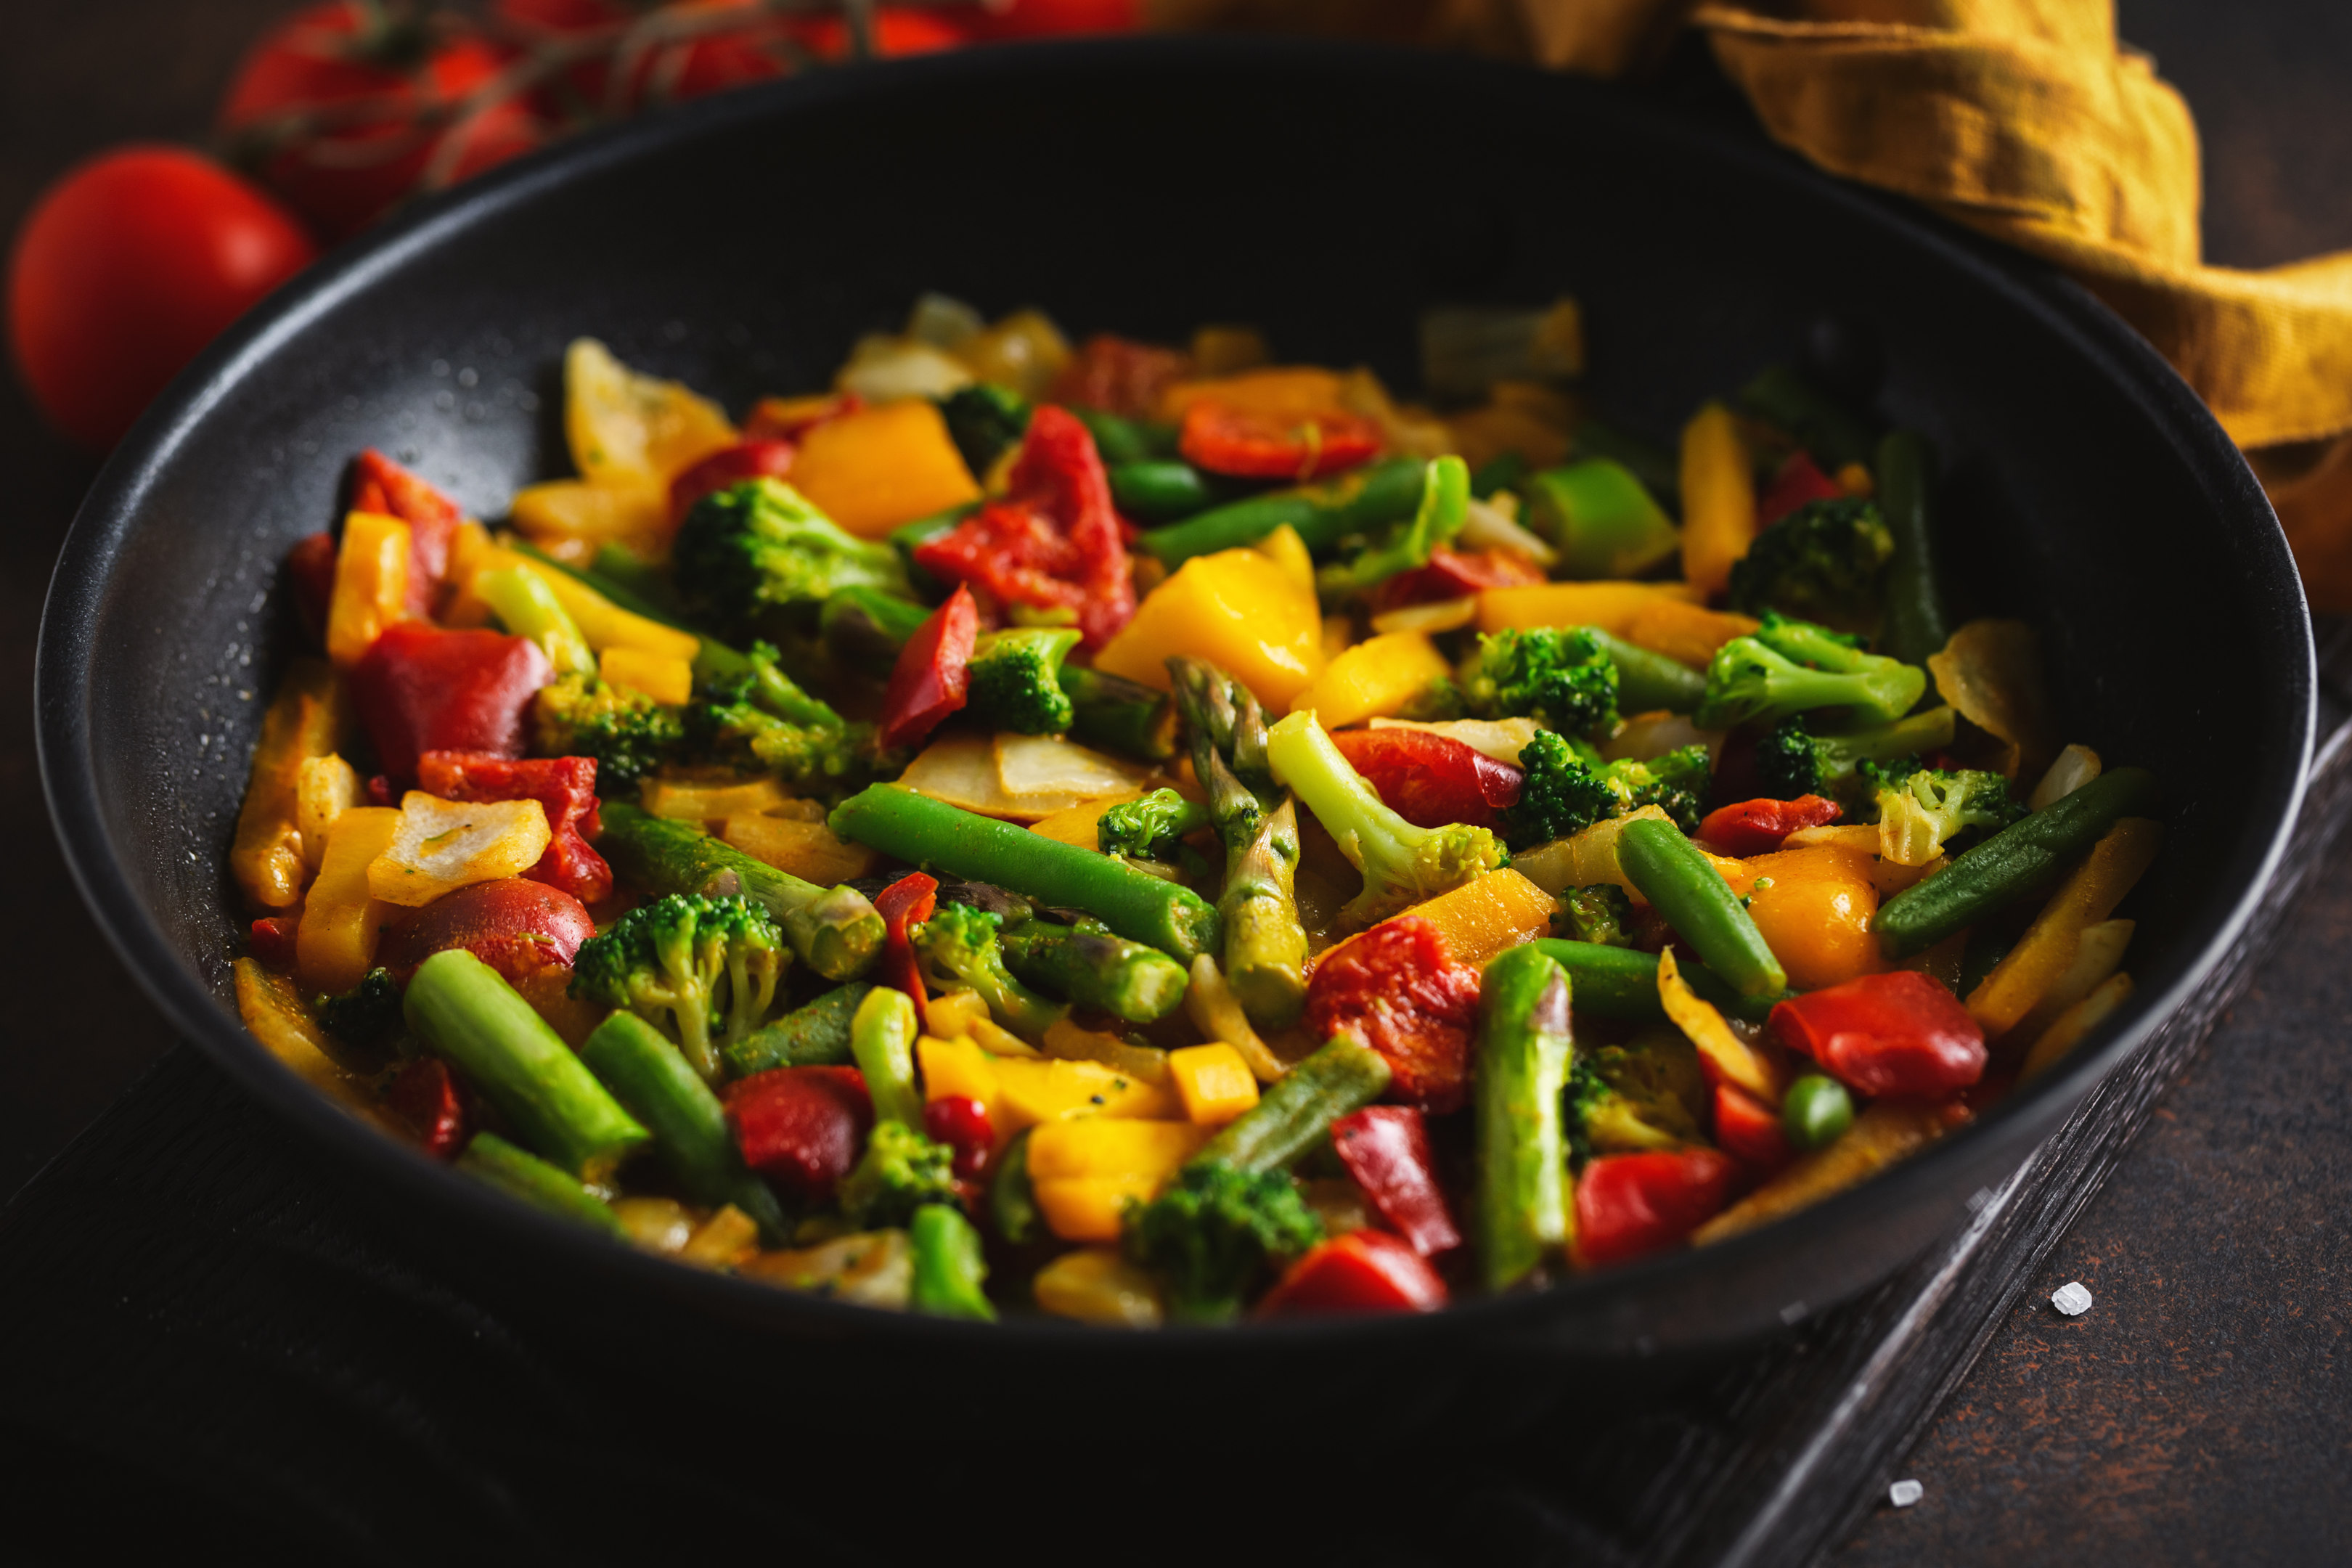 Experiment with delicious flavors and vegetables to create your best stir fry recipe.